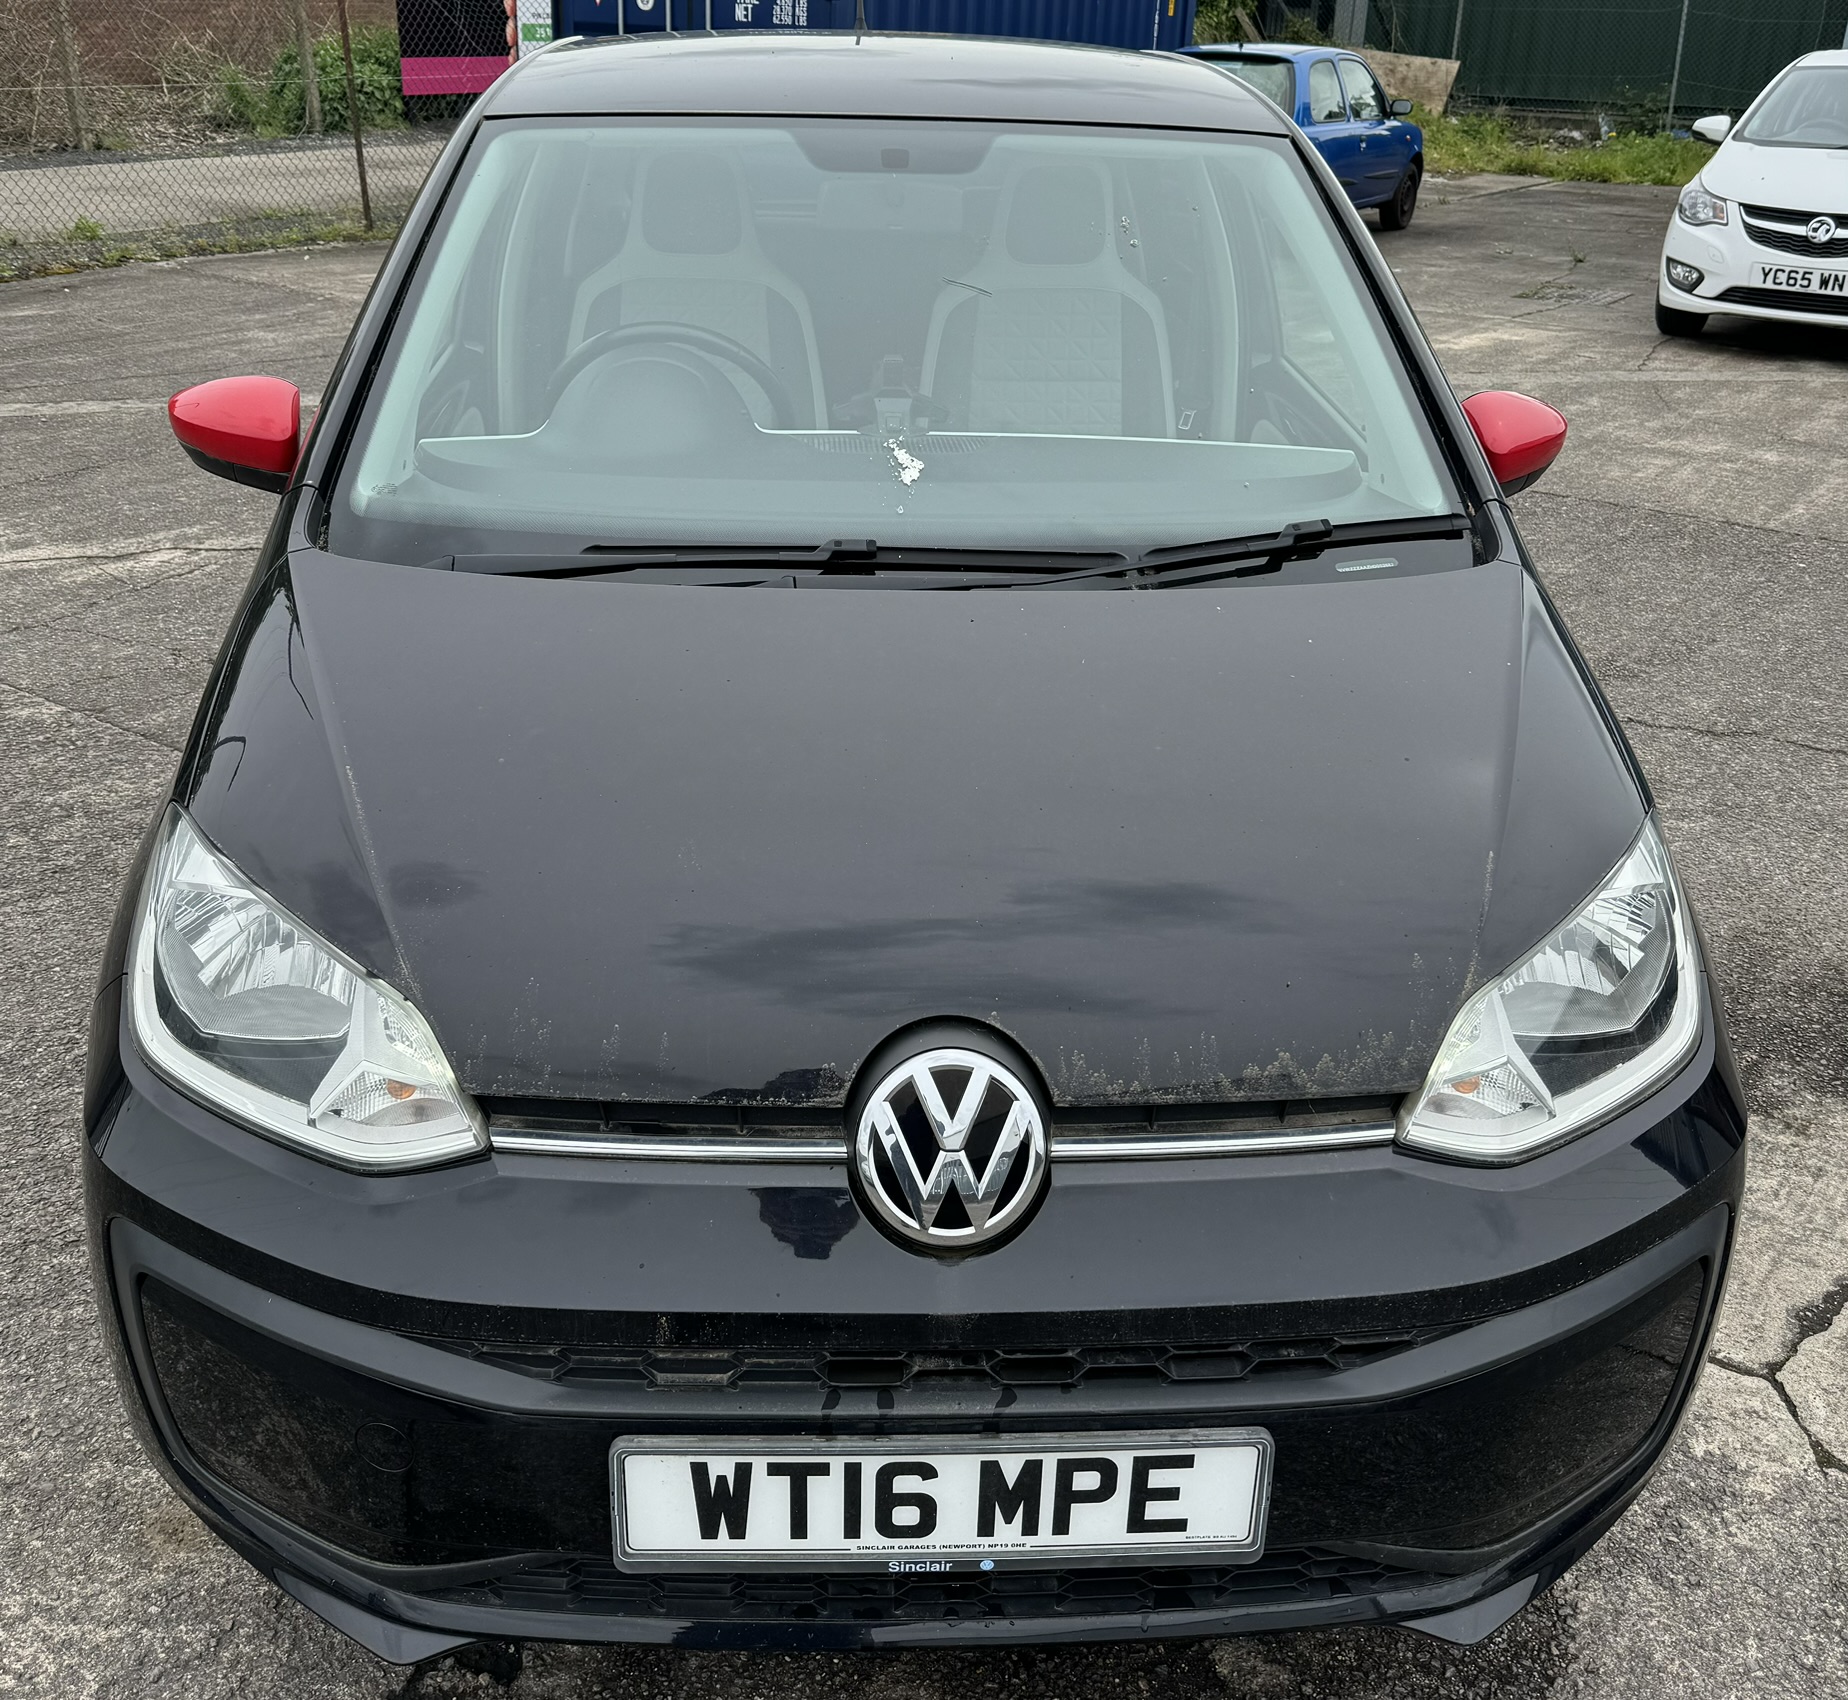 A 2016 Volkswagen UP by beats, 999cc, registration number WT16 MPE in black, MOT until 05/07/24, - Image 4 of 9